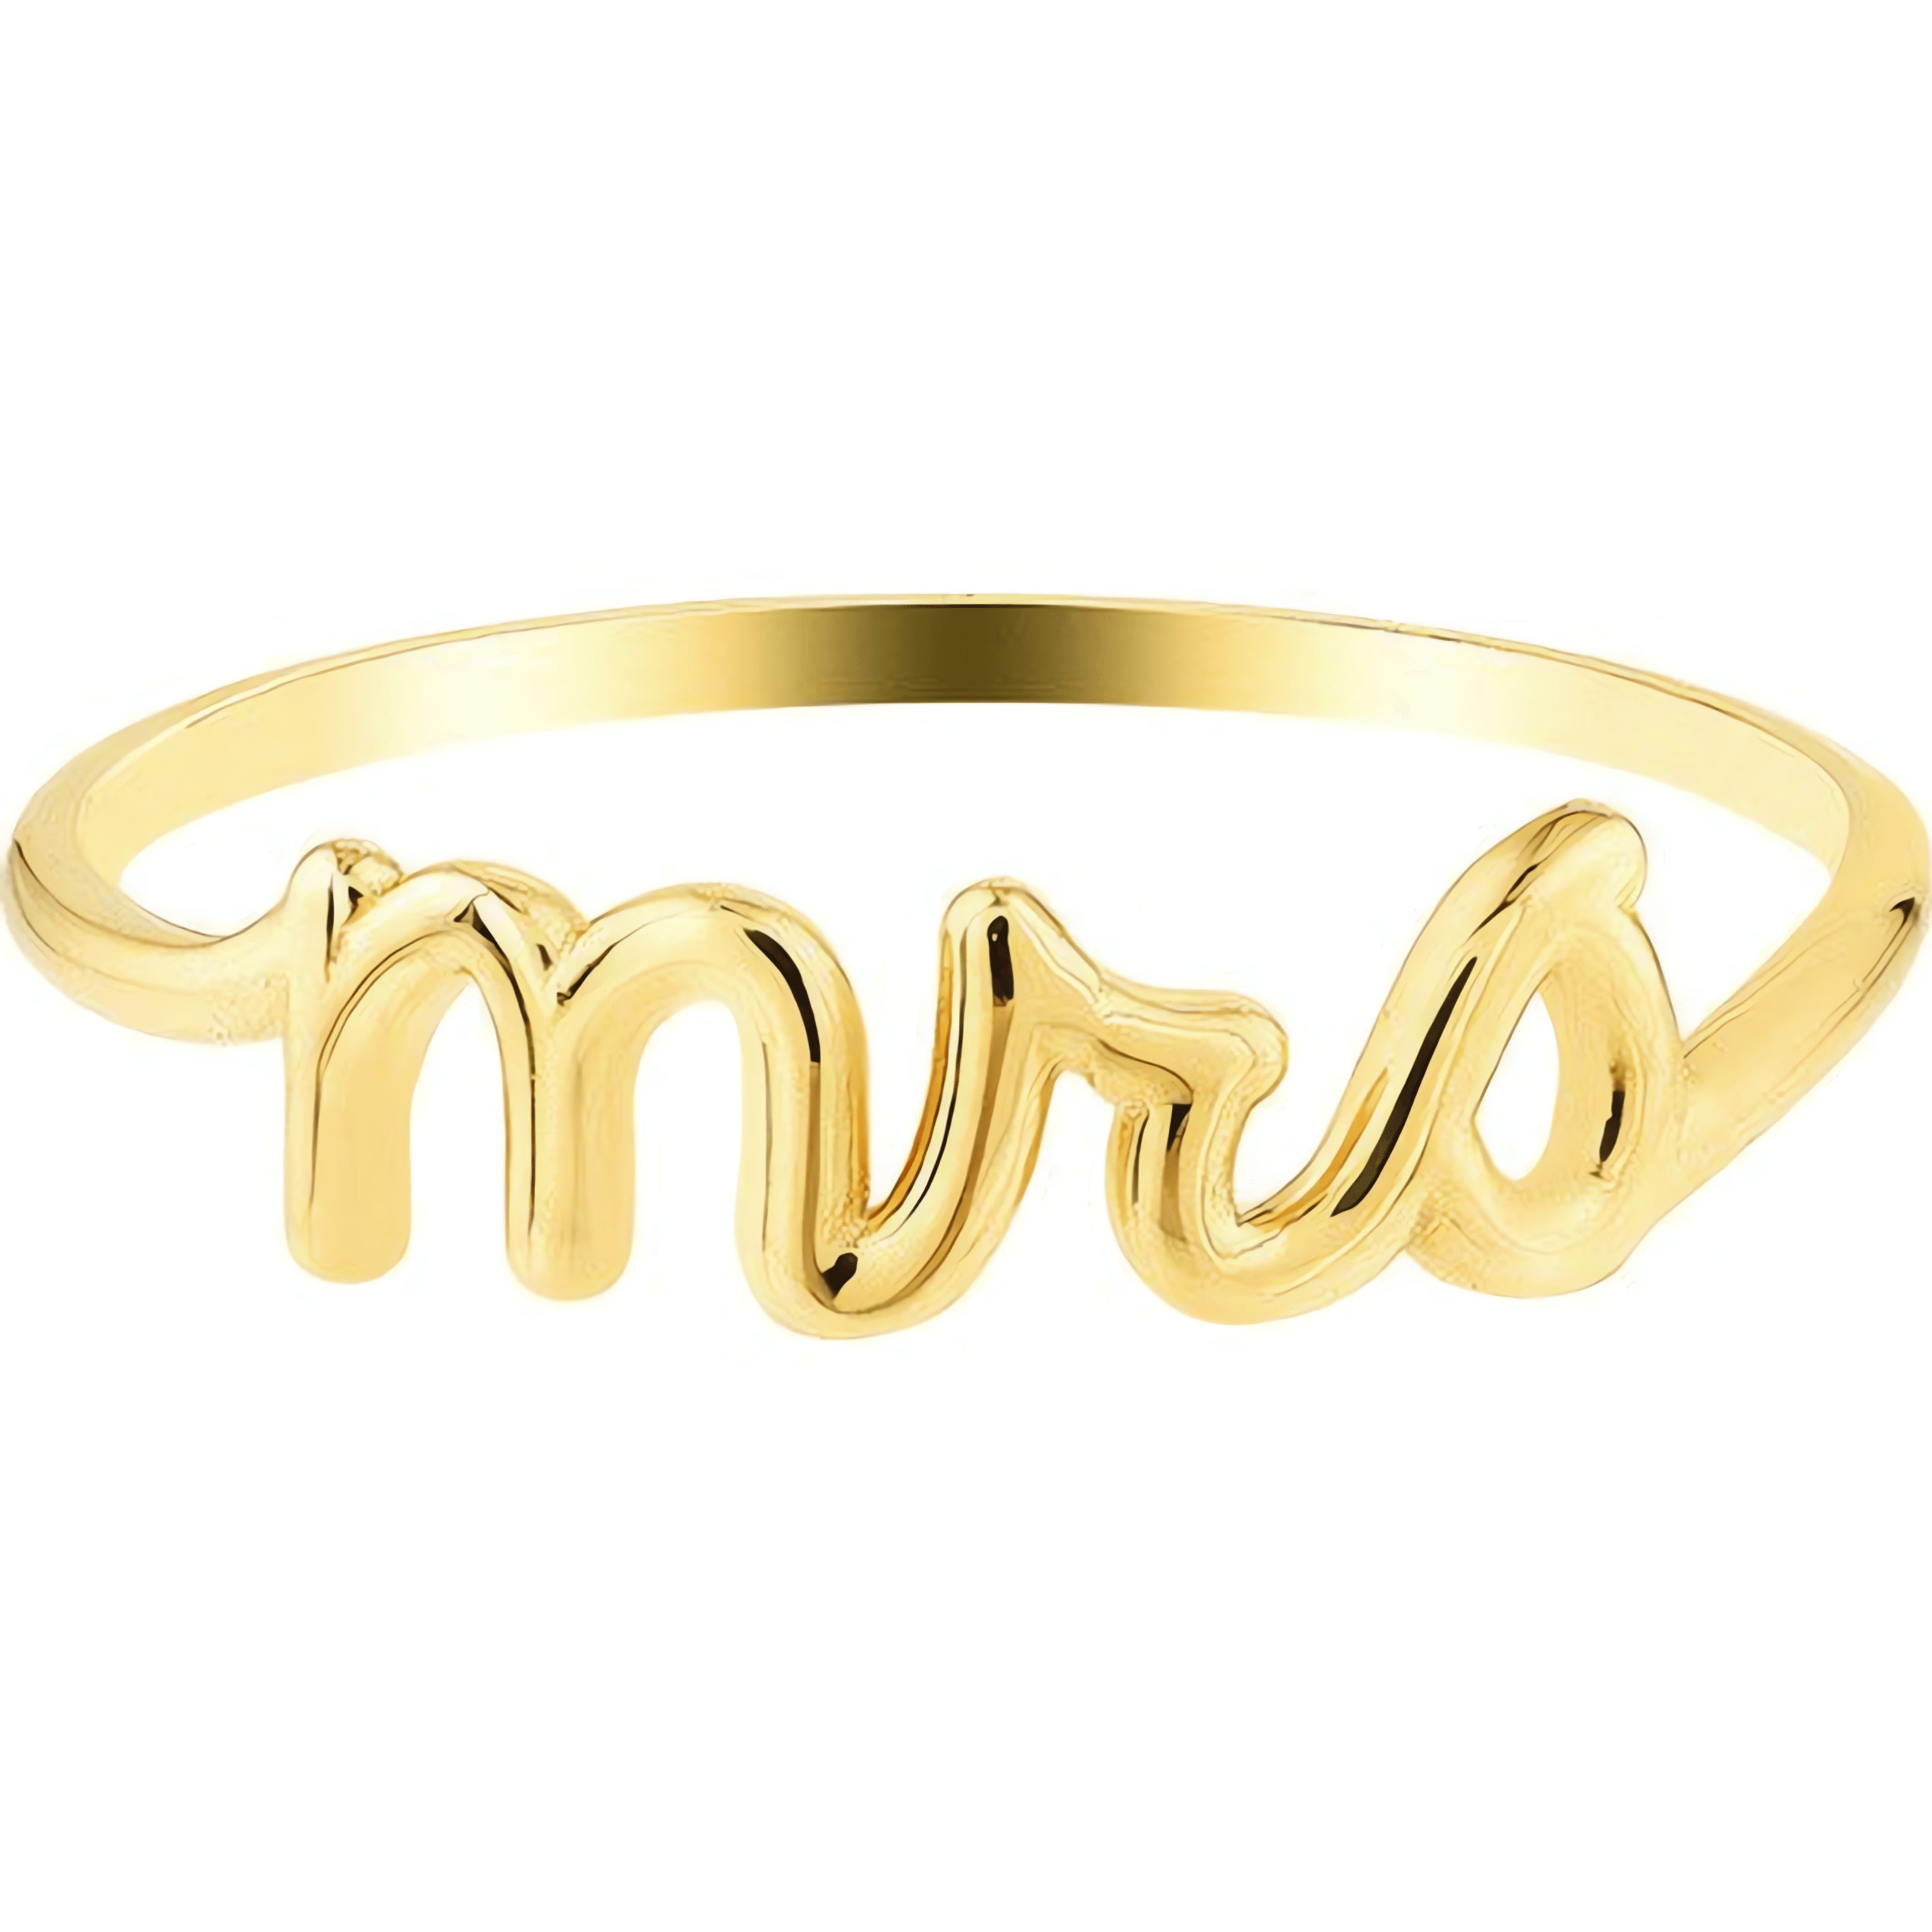 14kt Gold Scripts Collection "Mrs" Ring | Ritani